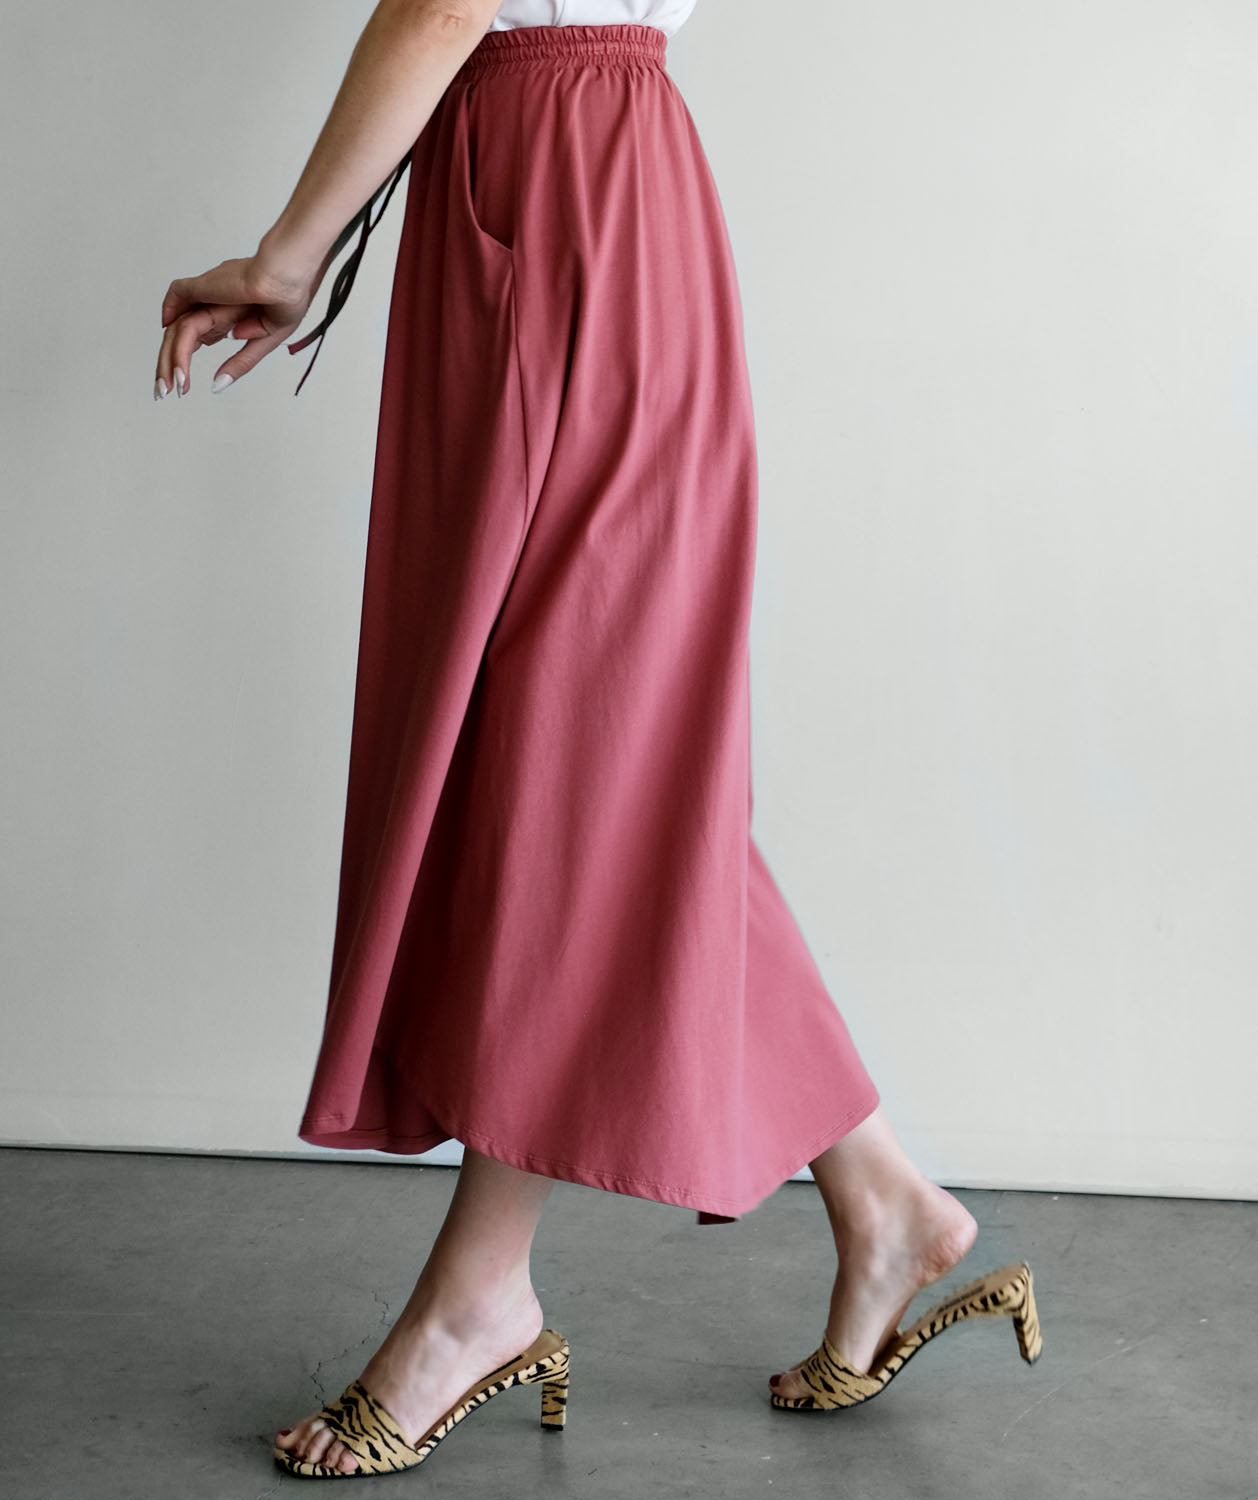 BETH skirt in Withered Rose